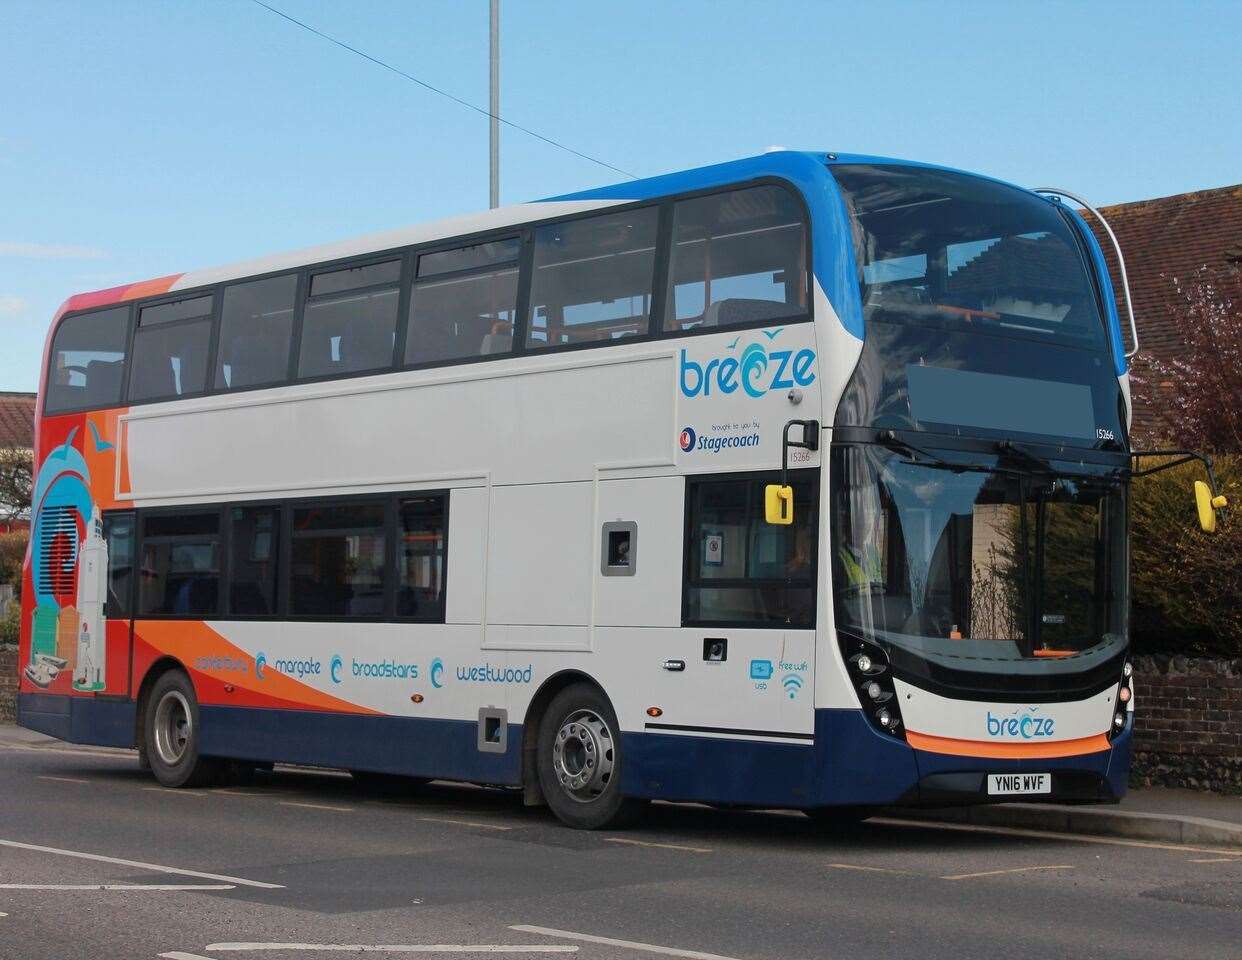 The app update will be available to Kent bus users by 18 June